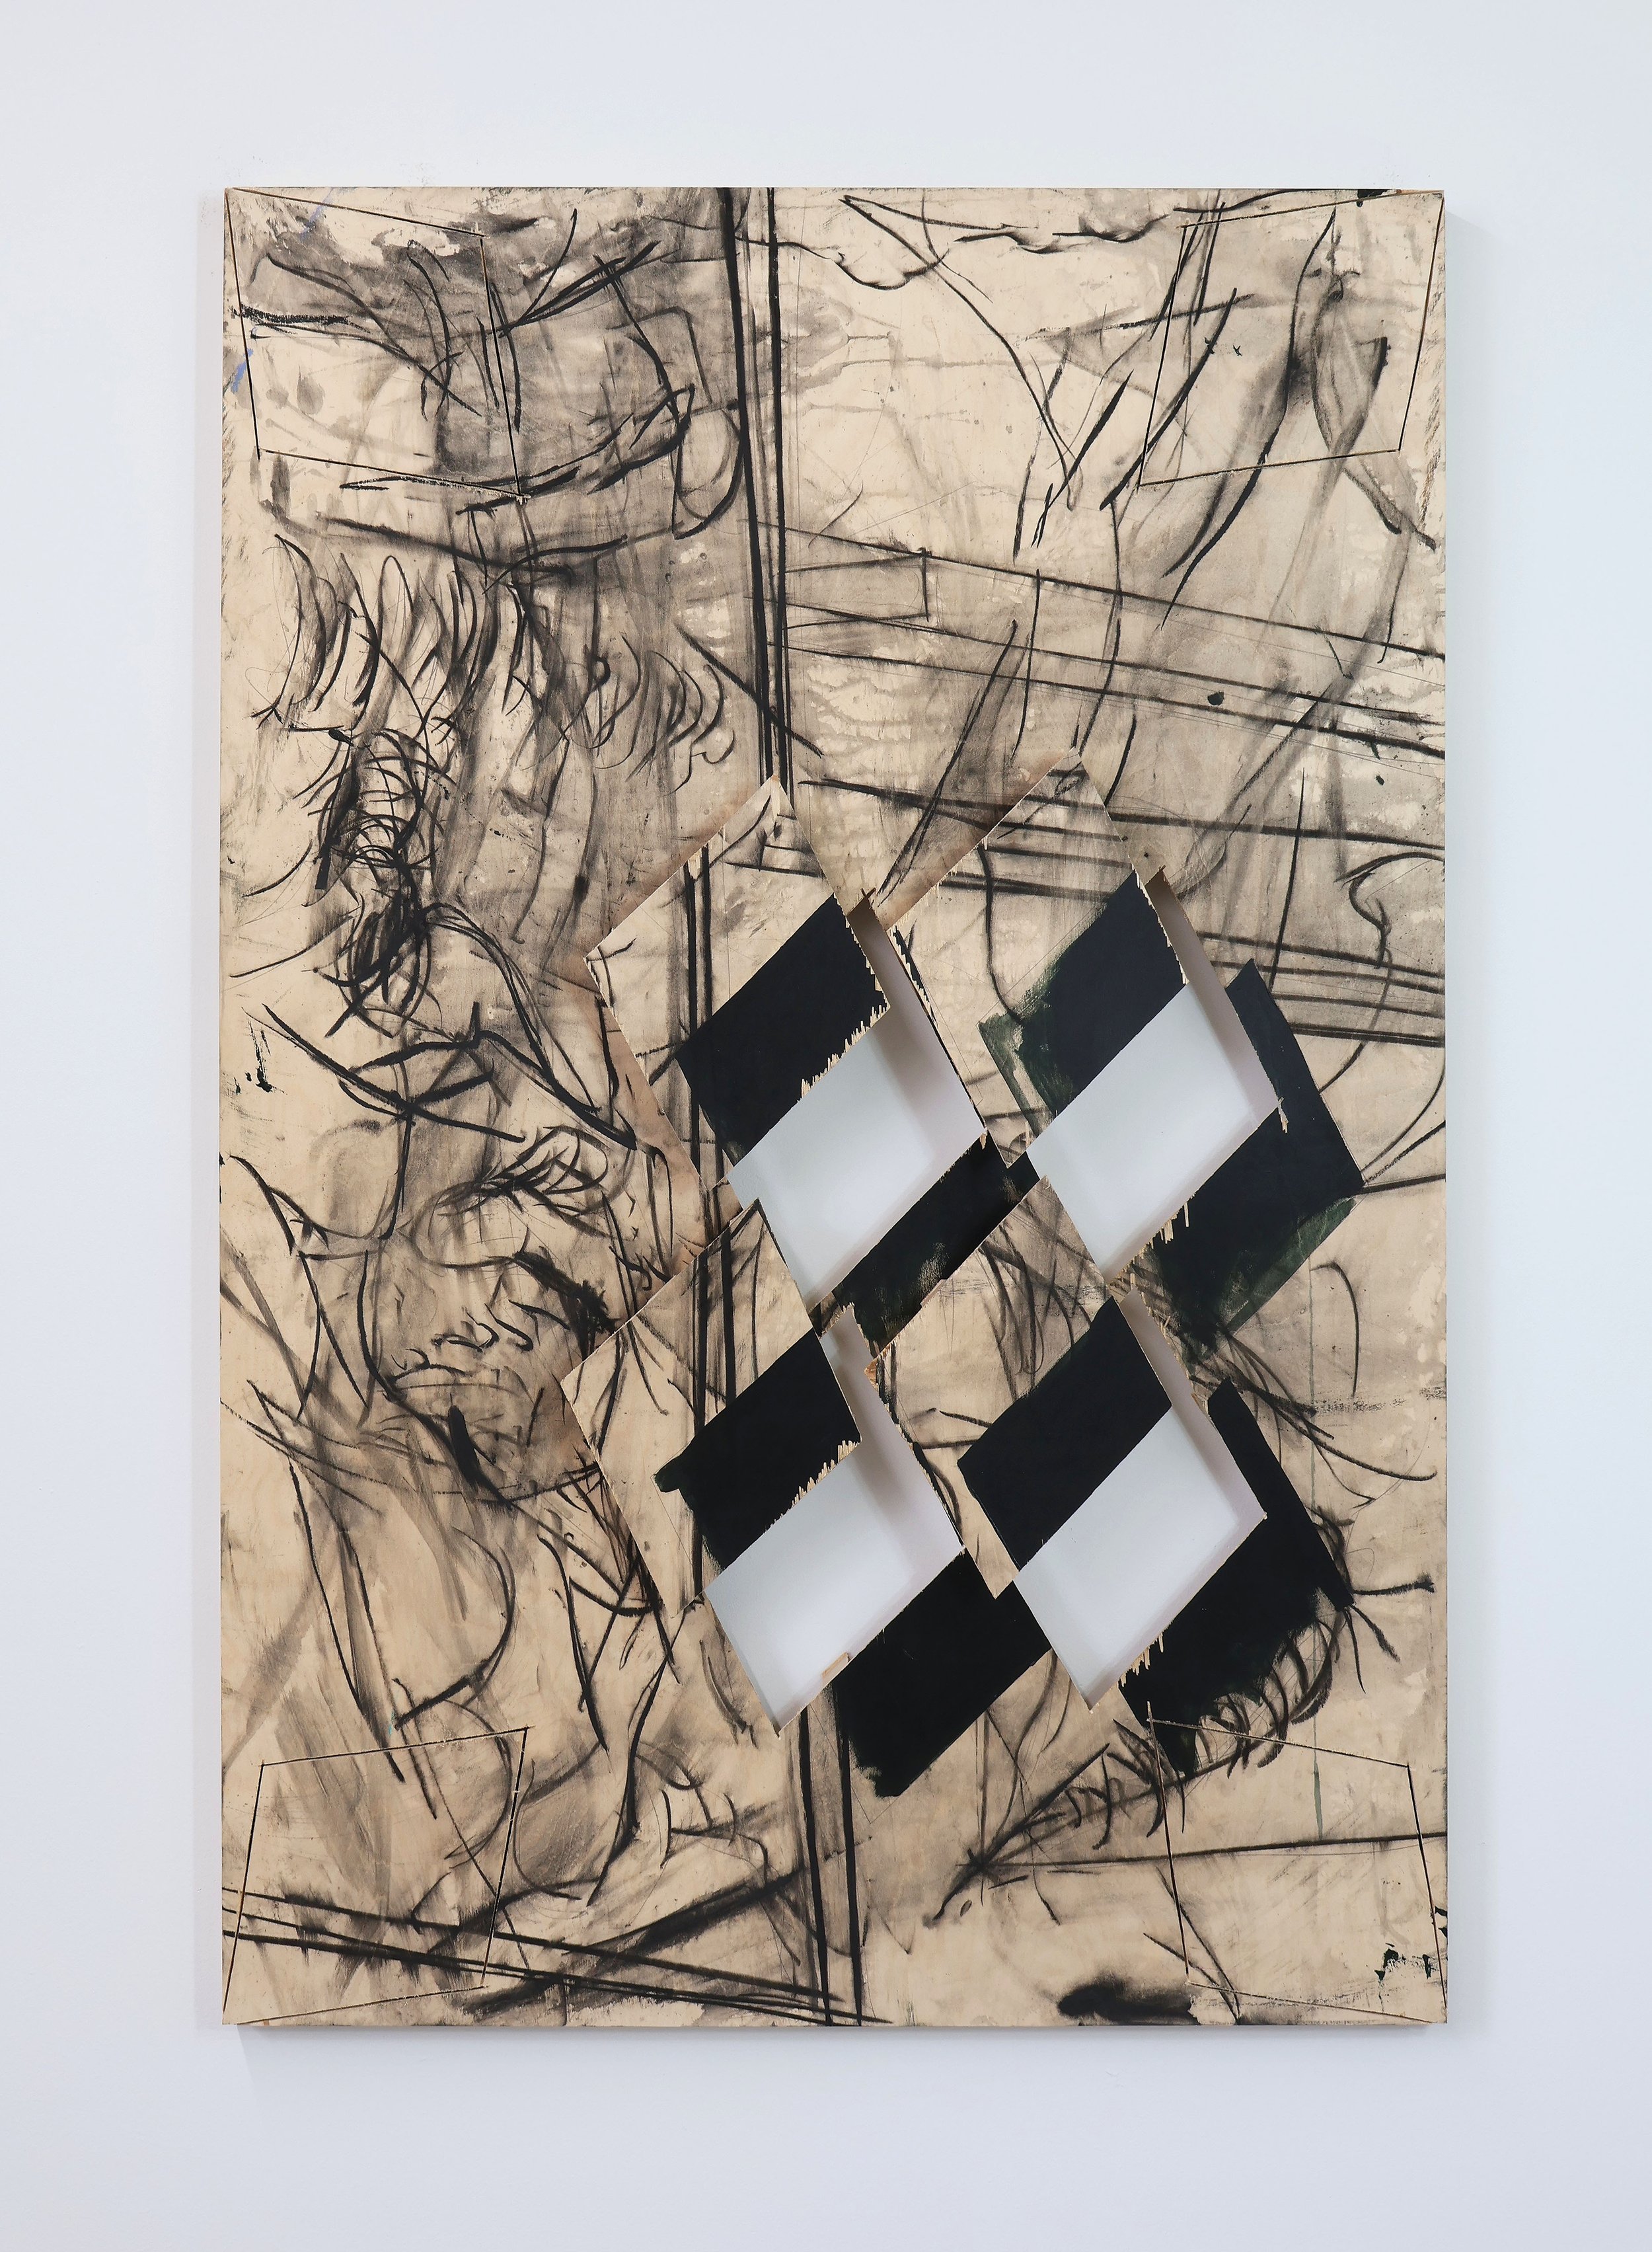  Untitled  Acrylic, charcoal, graphite pencil on wood panel.   60 x 40 x 2 in  2023 